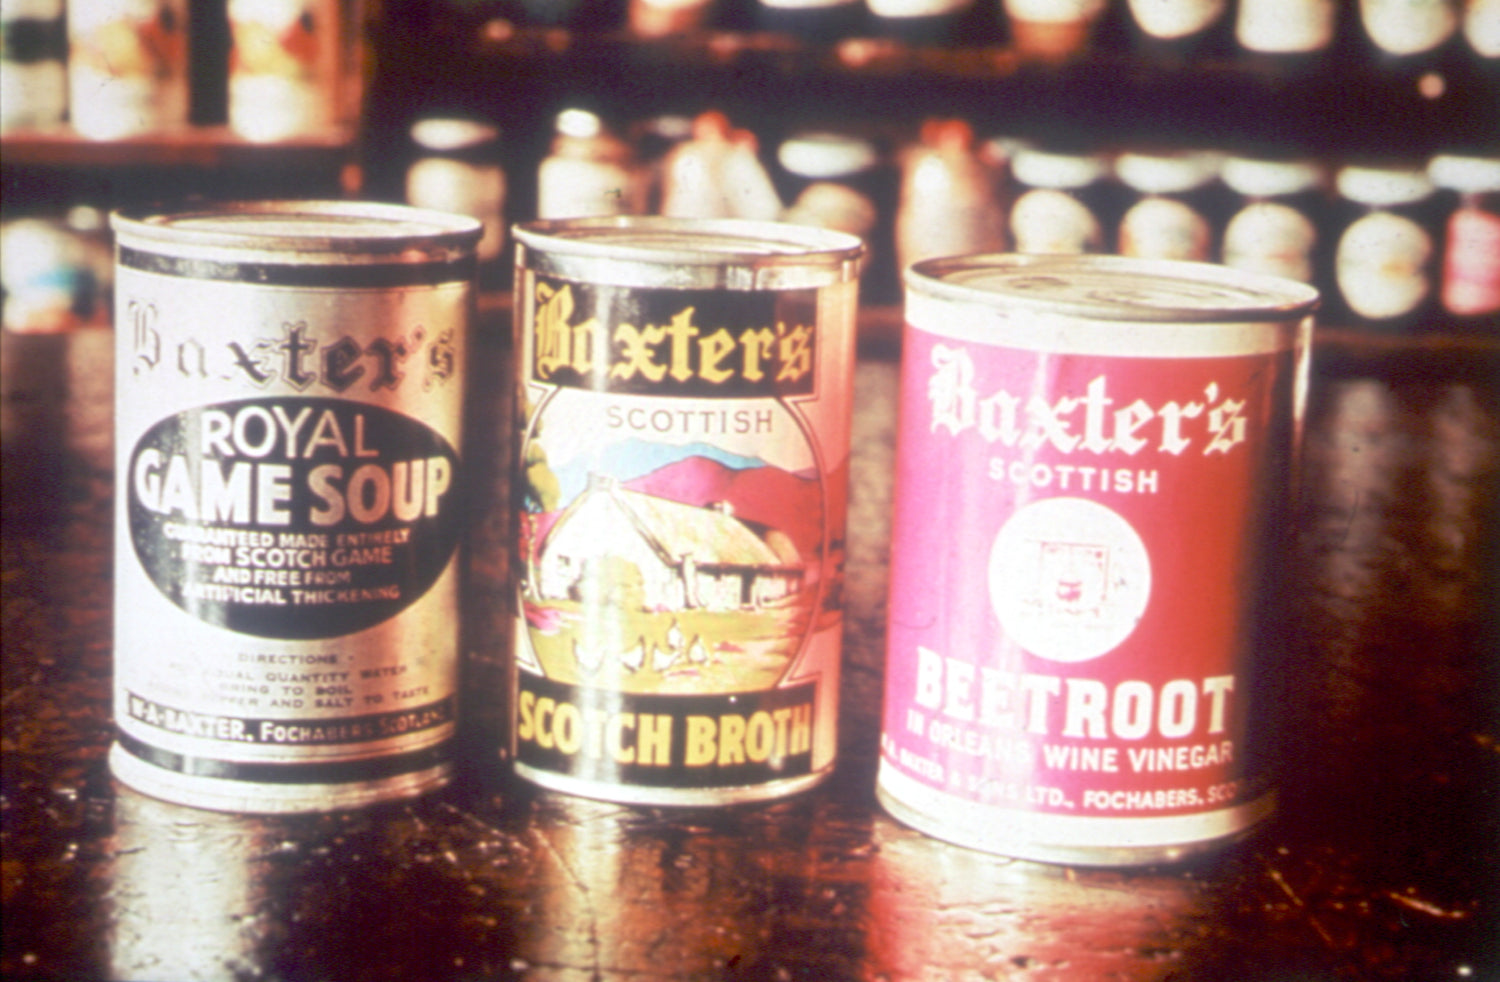 Old Royal Game, Scotch Broth, and Beetroot cans